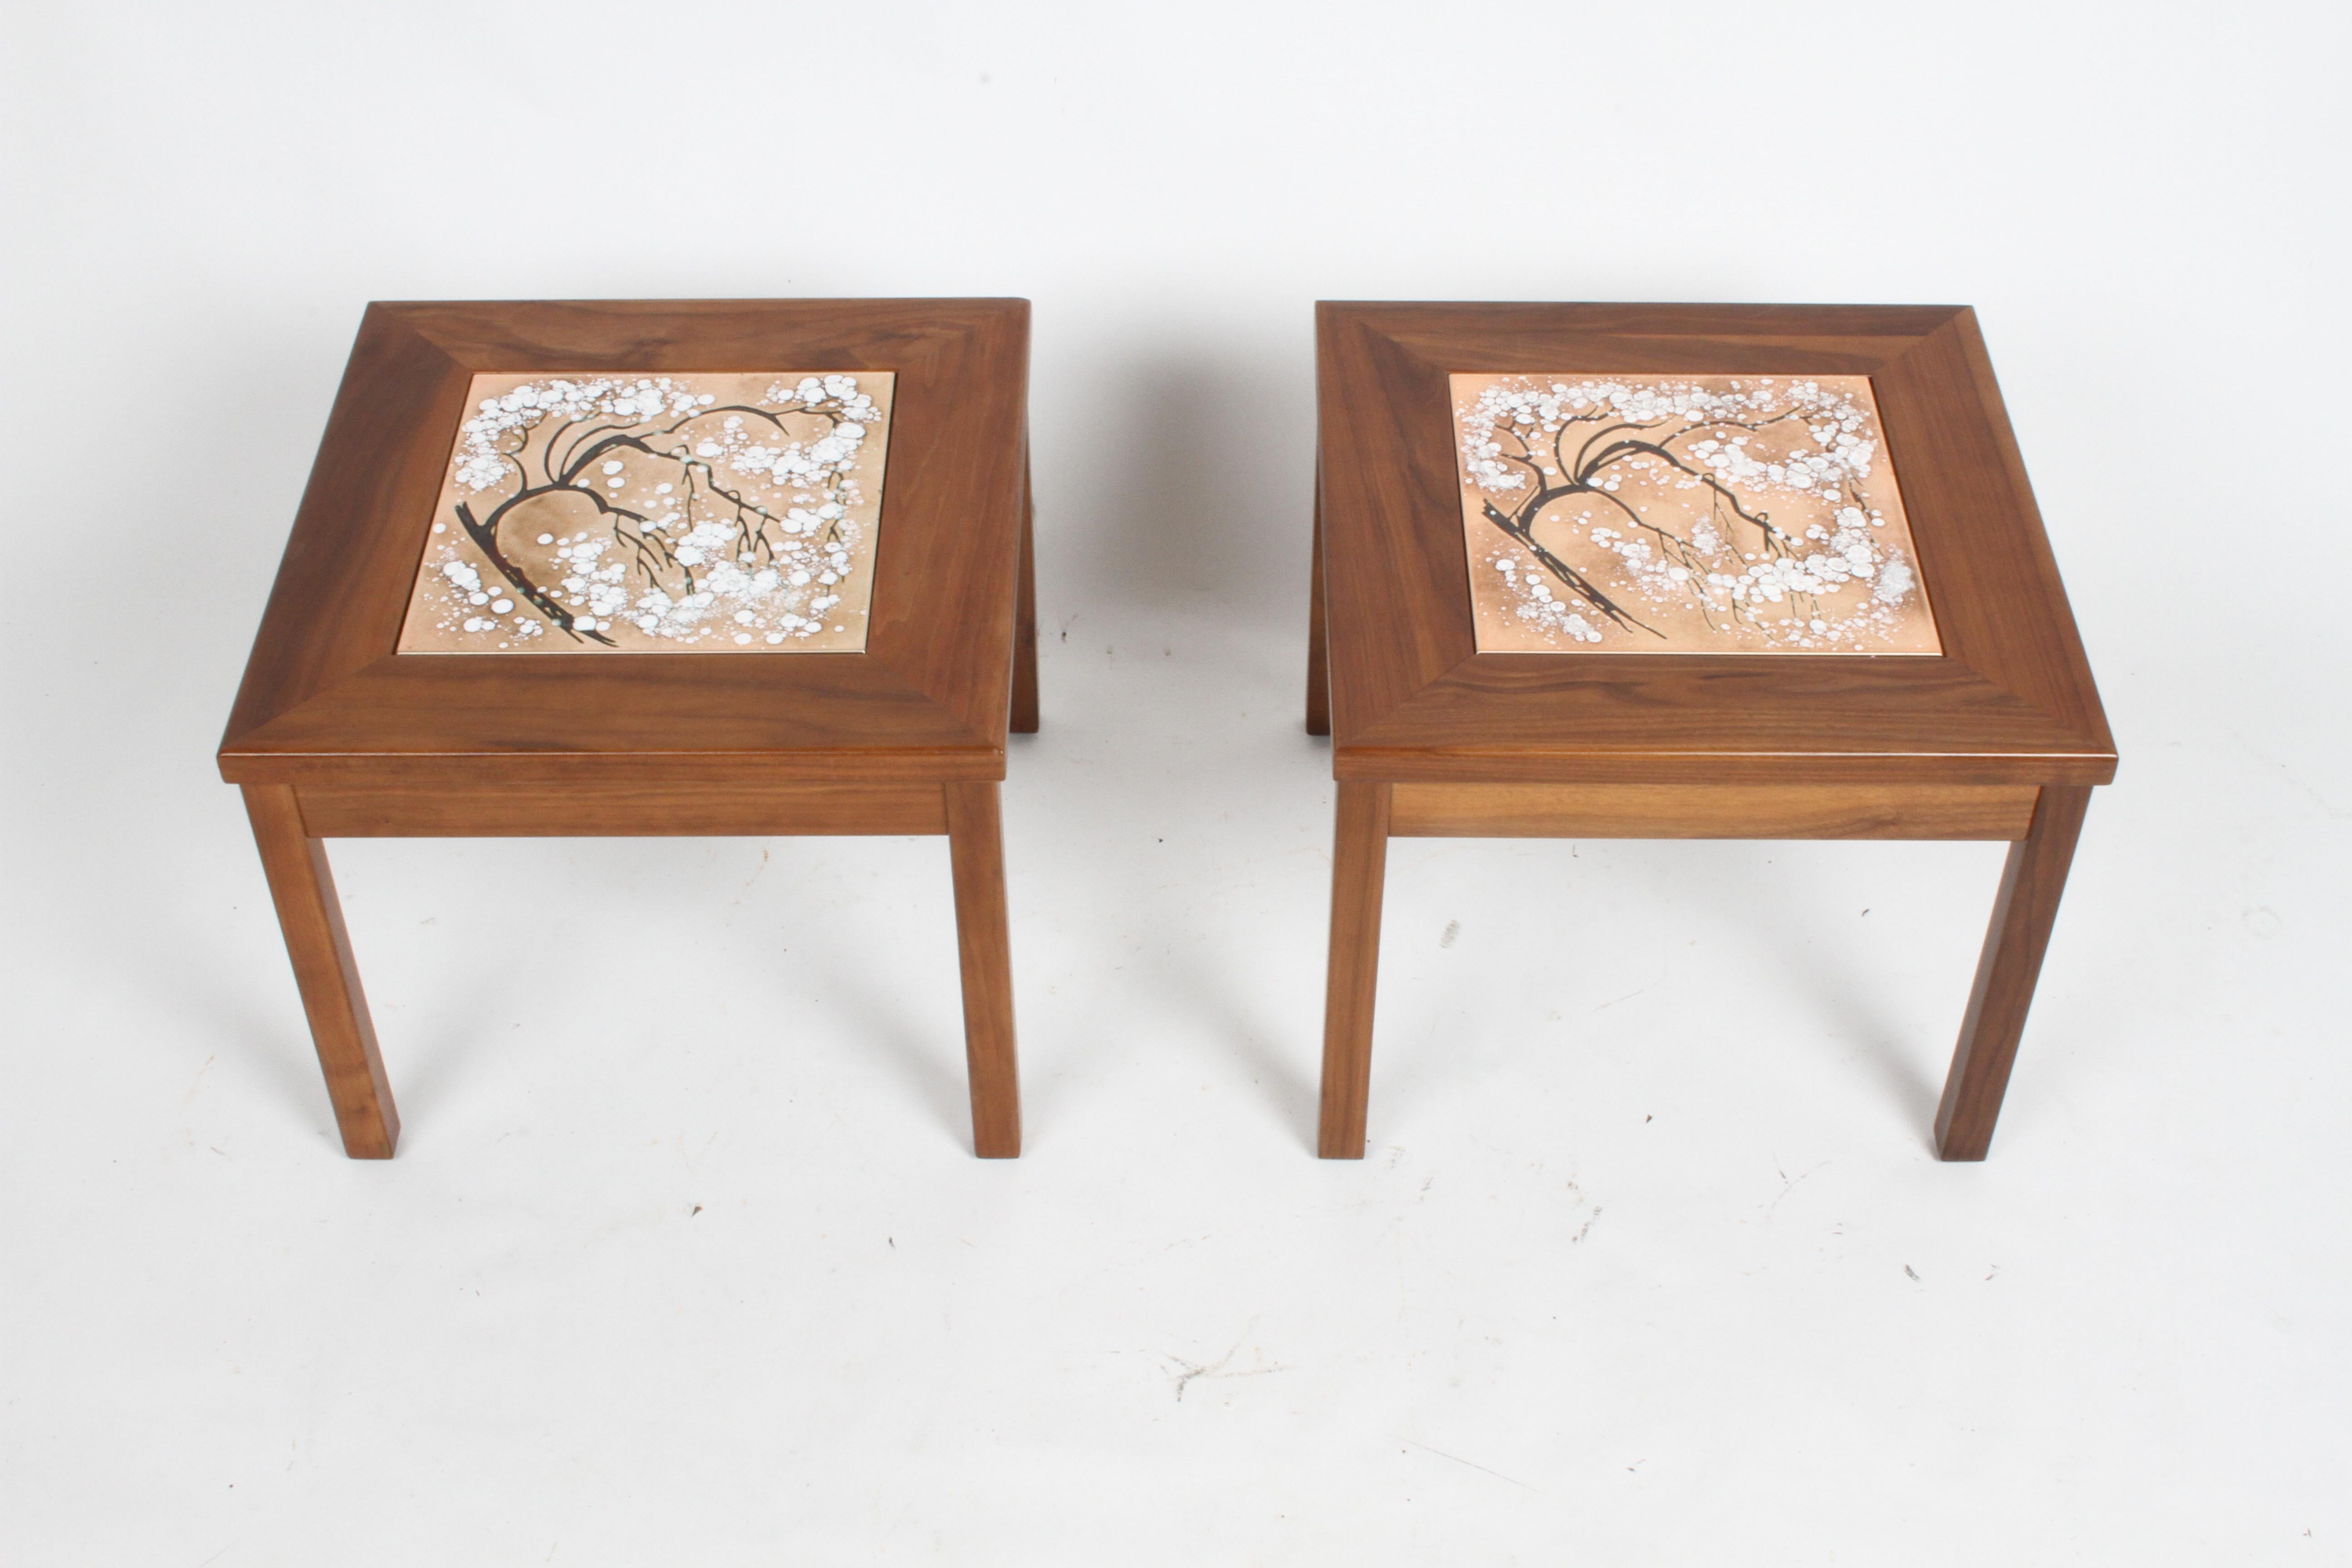 Pair of Mid-Century Modern John Keal for Brown Saltman walnut side tables with colorful ceramic art tiles in an abstract of a Japanese Snowbell Tree. Newly refinished and reglued. No labels.